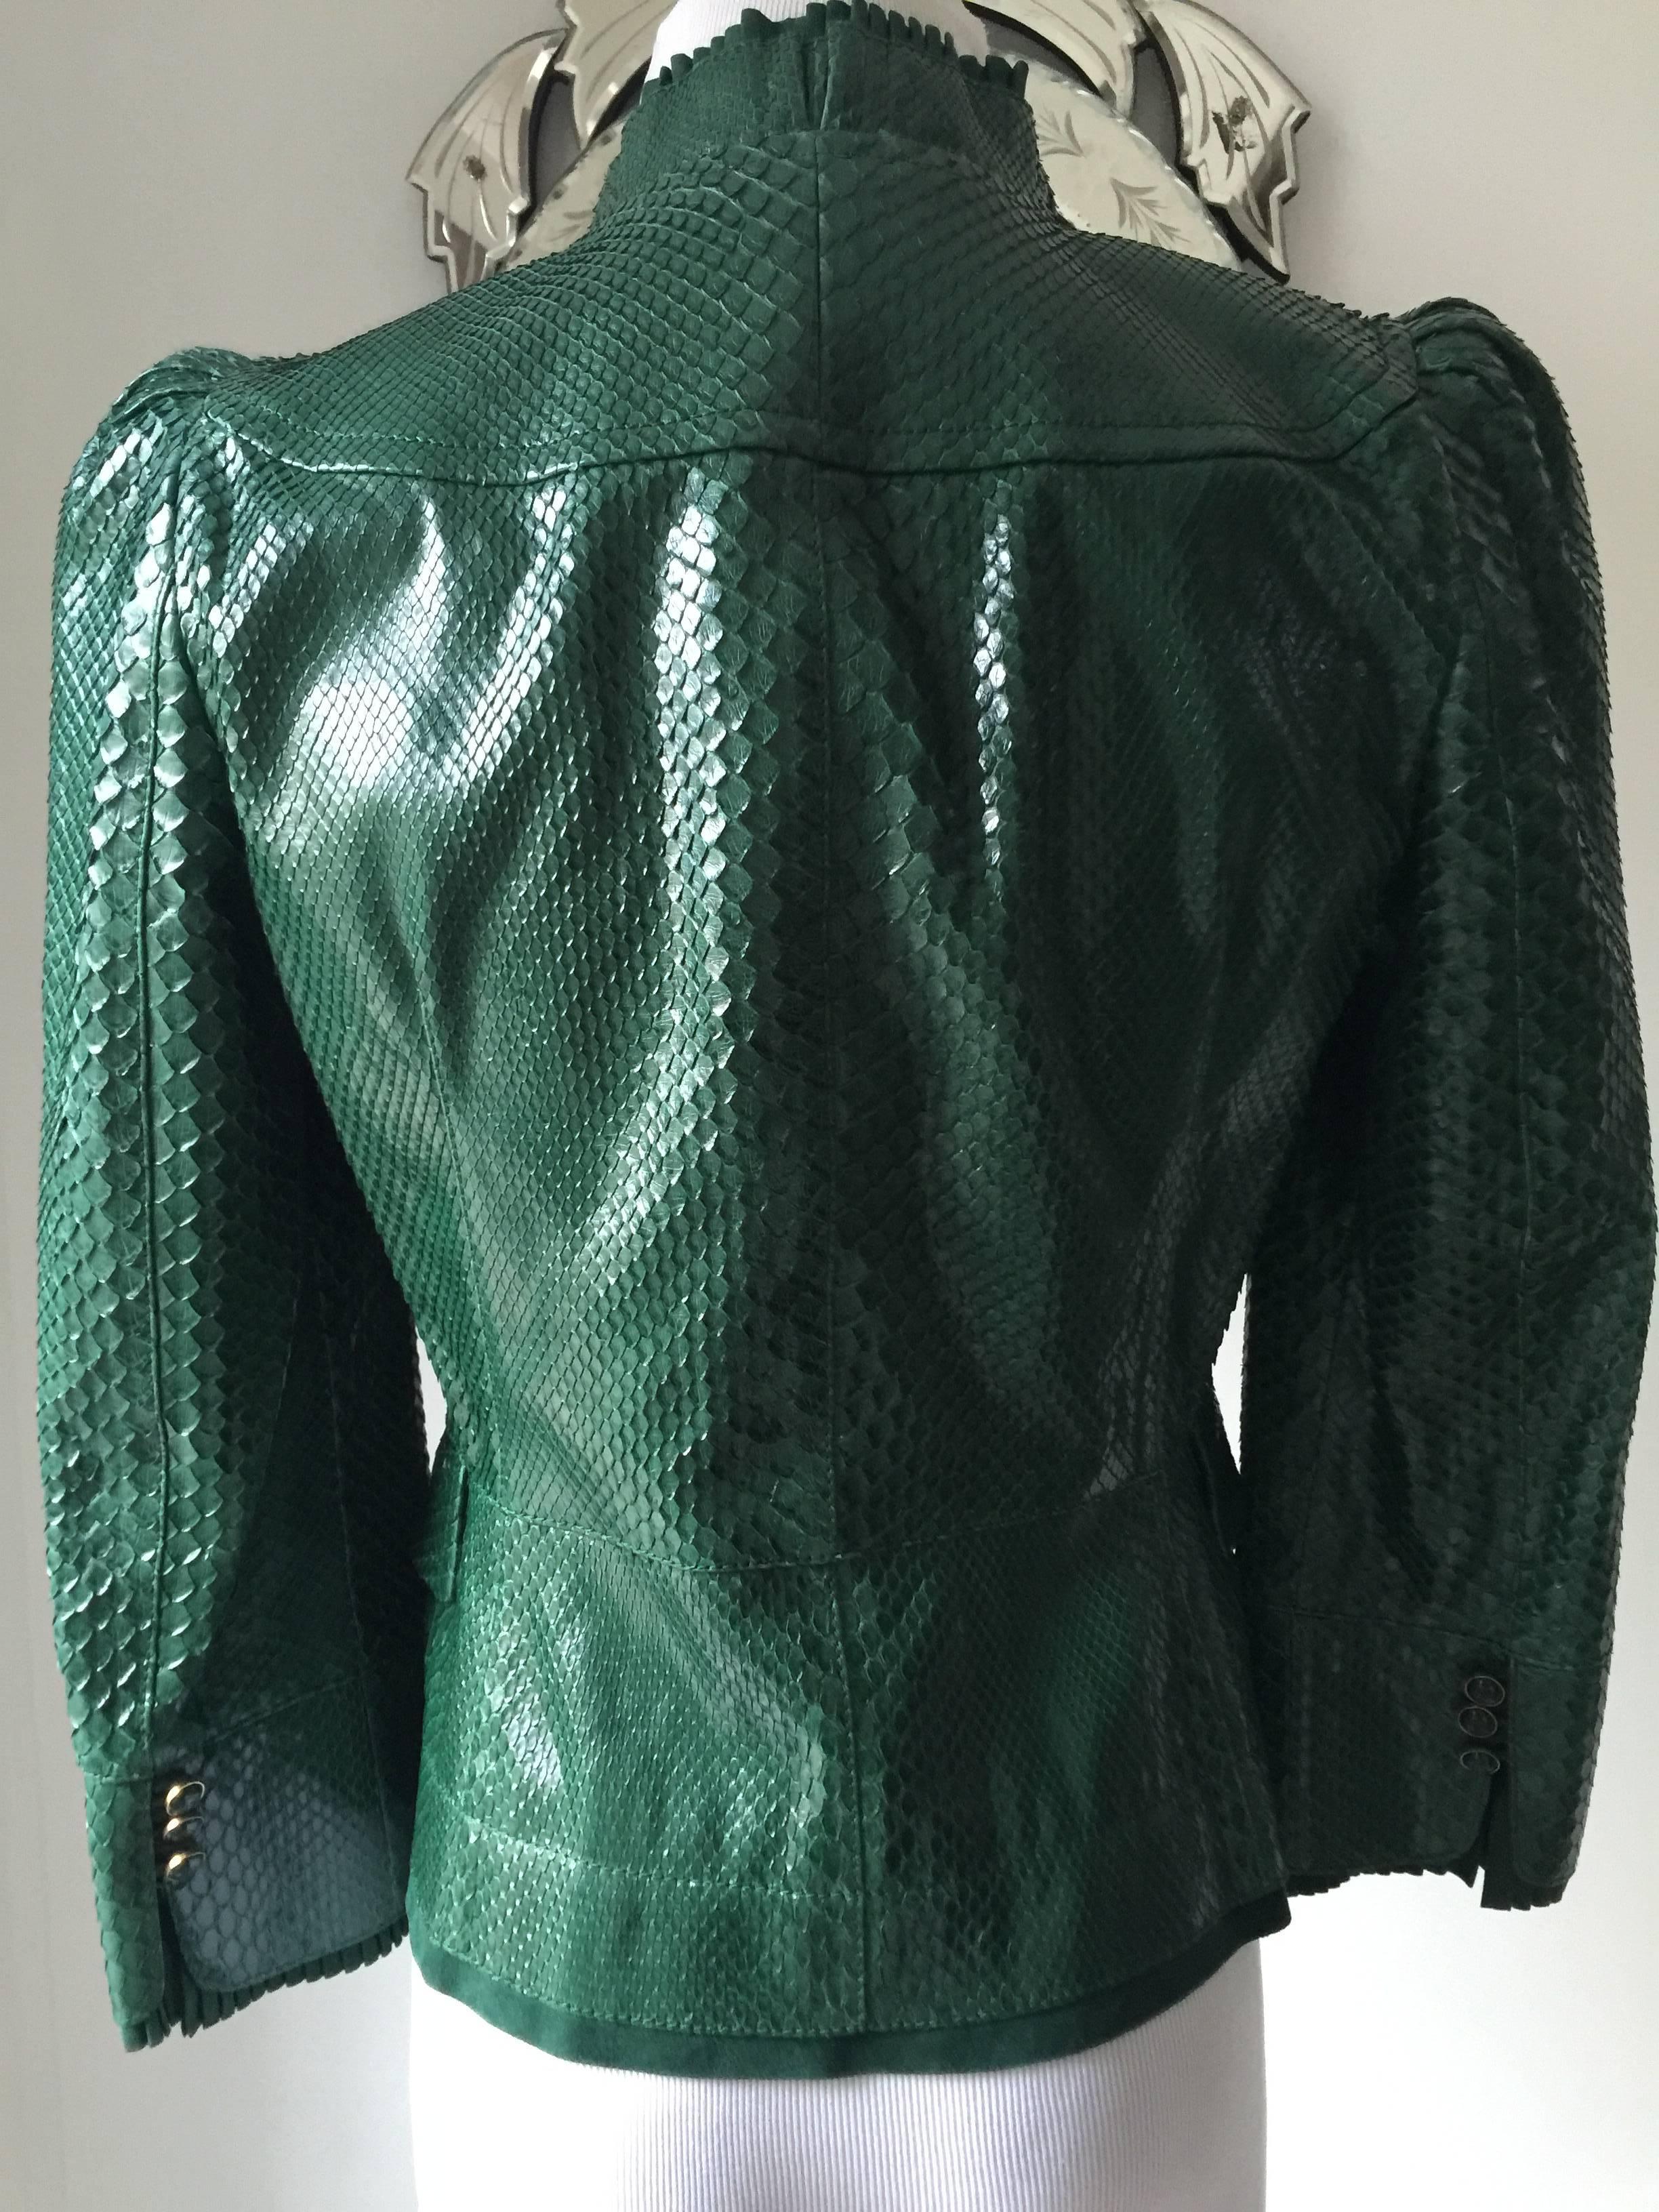 This is a wonderful jacket from spring/summer 2006...
100% python with leather trim and lined in 100% silk...the jacket has a small peblum and a small gold tone belt....collar and sleeves have a knife-pleating  detail in tonal suede...
dual flap